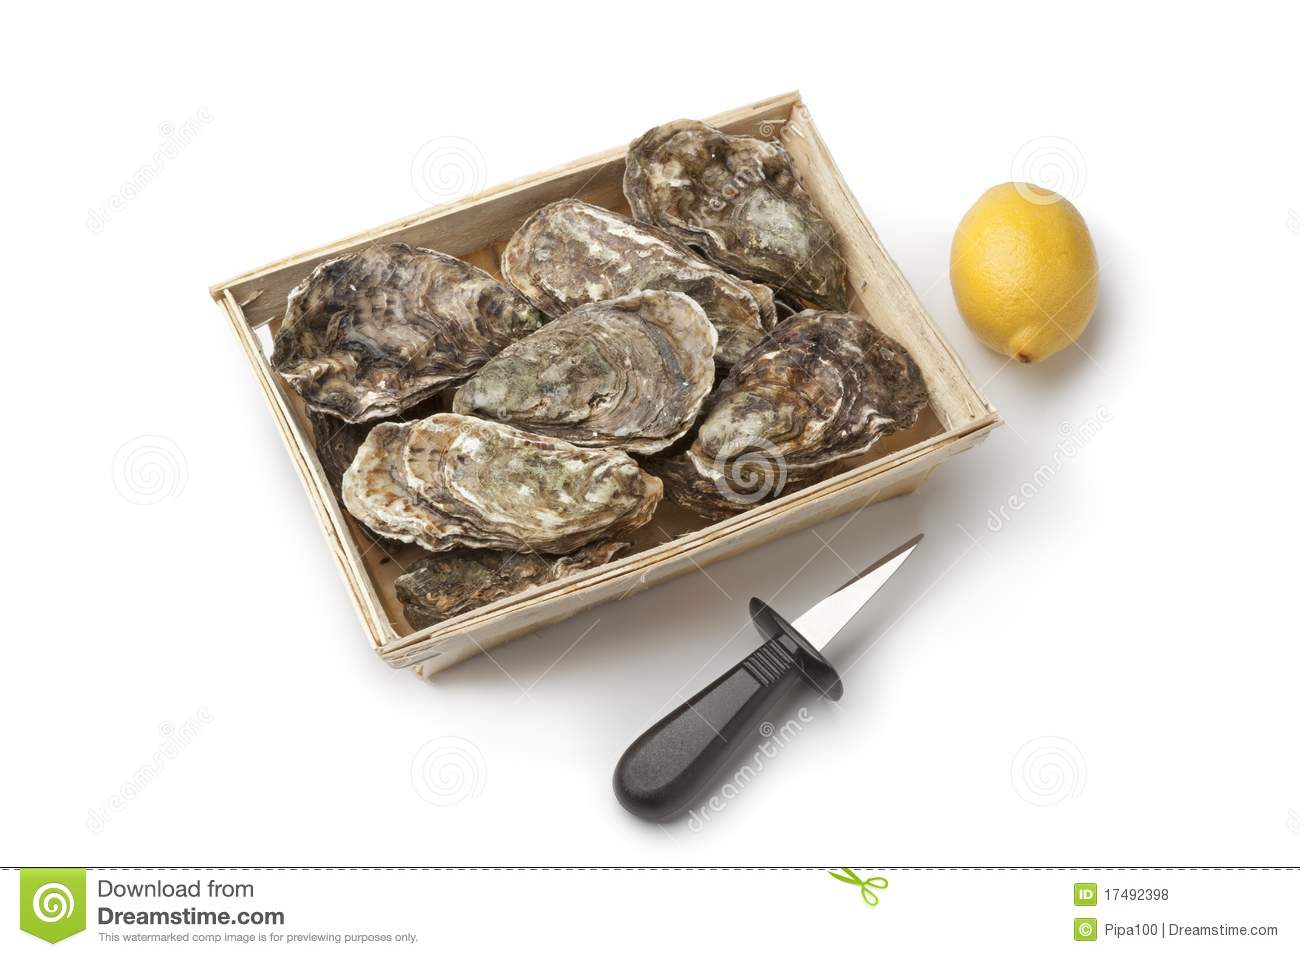 Fresh Raw Oysters In A Box Royalty Free Stock Photos   Image  17492398